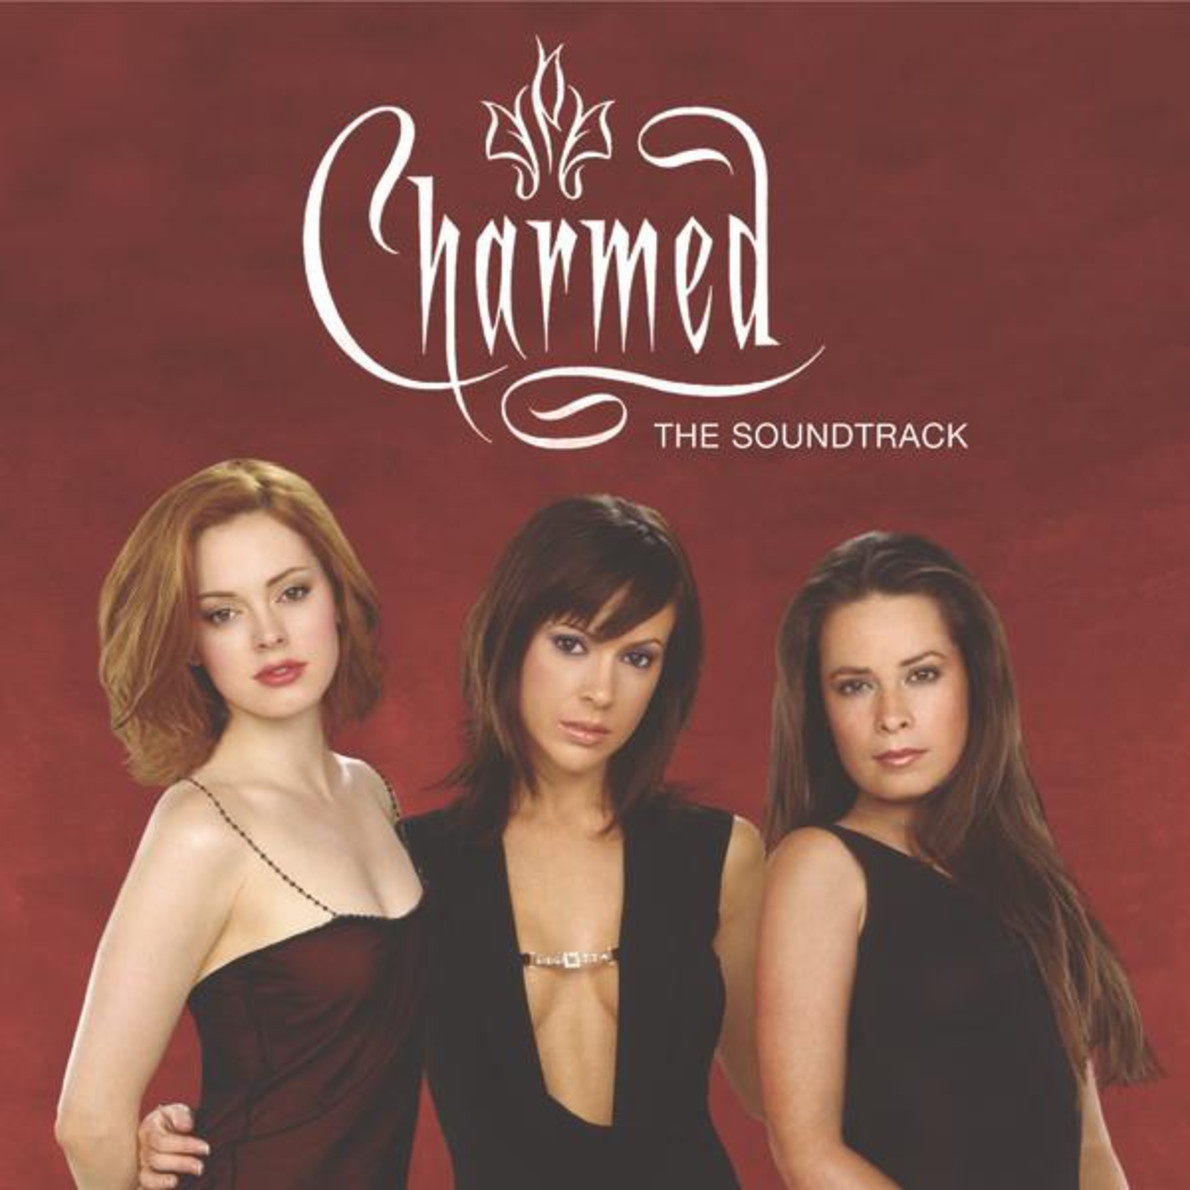 How Soon Is Now?(Charmed theme)